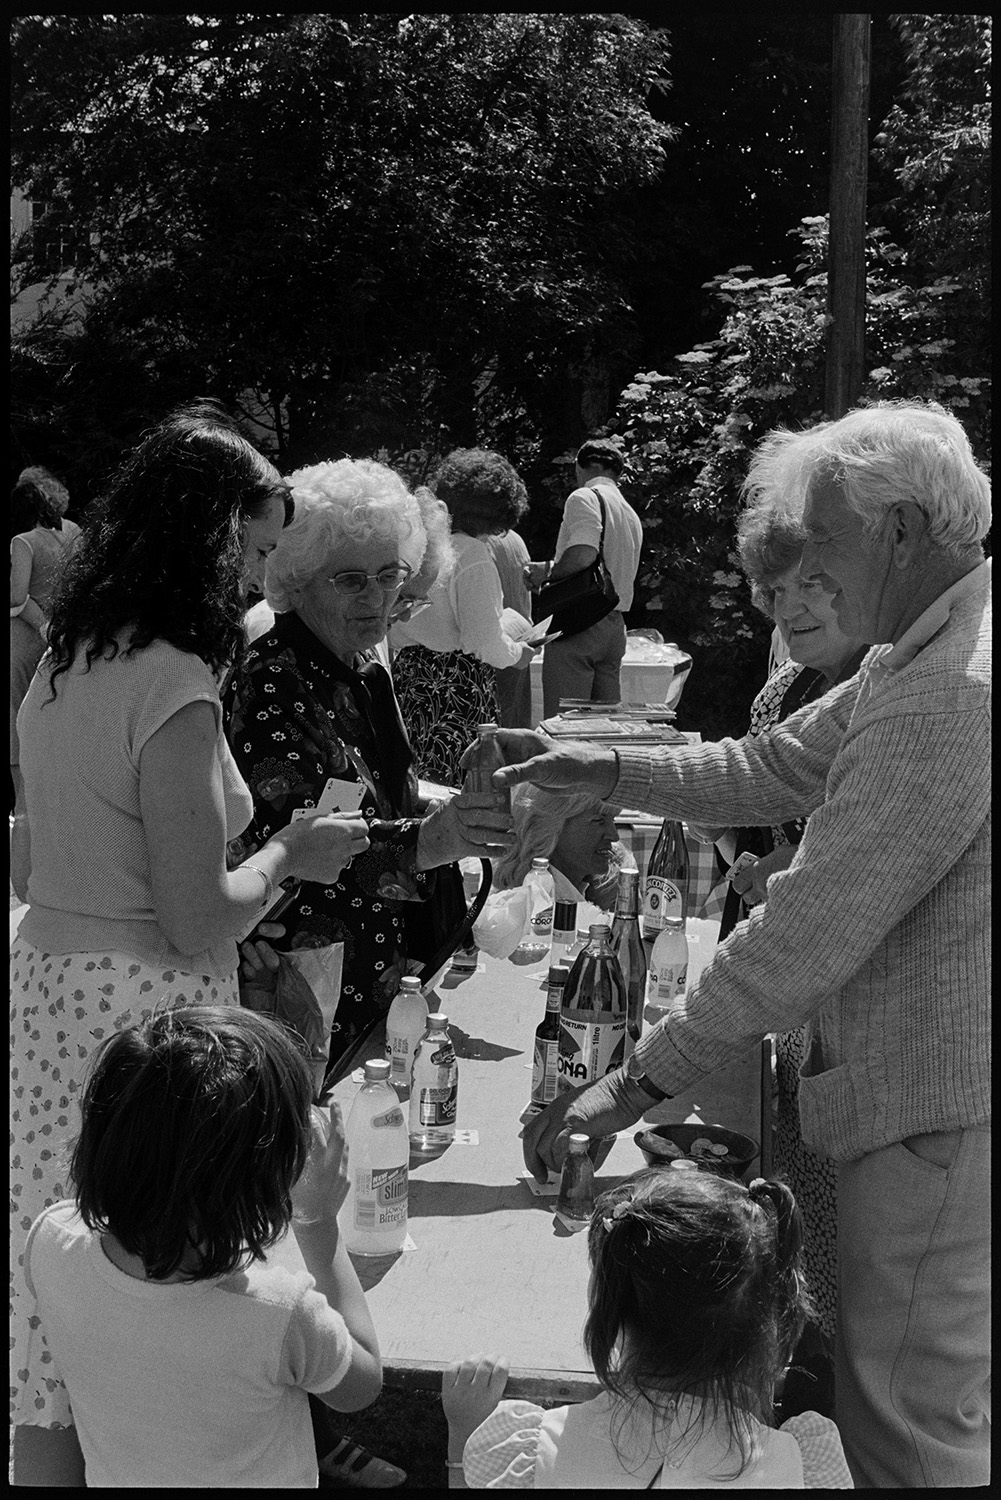 Stalls at fete, skittle alley cakes, raffle stall, pony ride. <br />
[Women and children having a go on a bottle stall at High Bickington church fete held at the vicarage.]